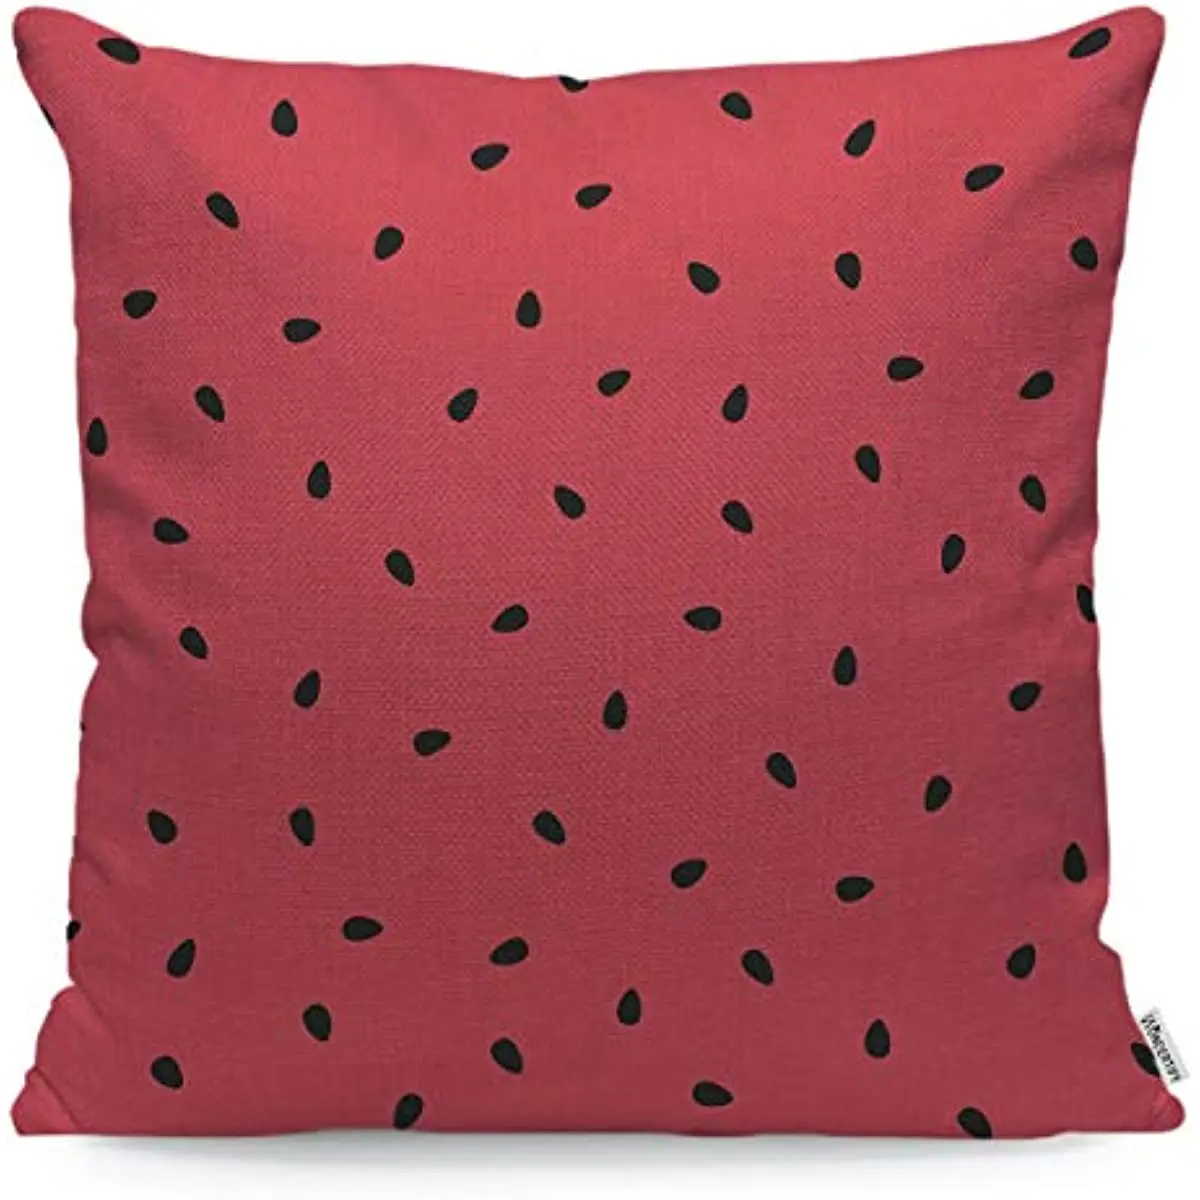 Fruit Watermelon Background with Black Seeds Summer Pillow Case for Decorative Home Farm House18x18 Inch